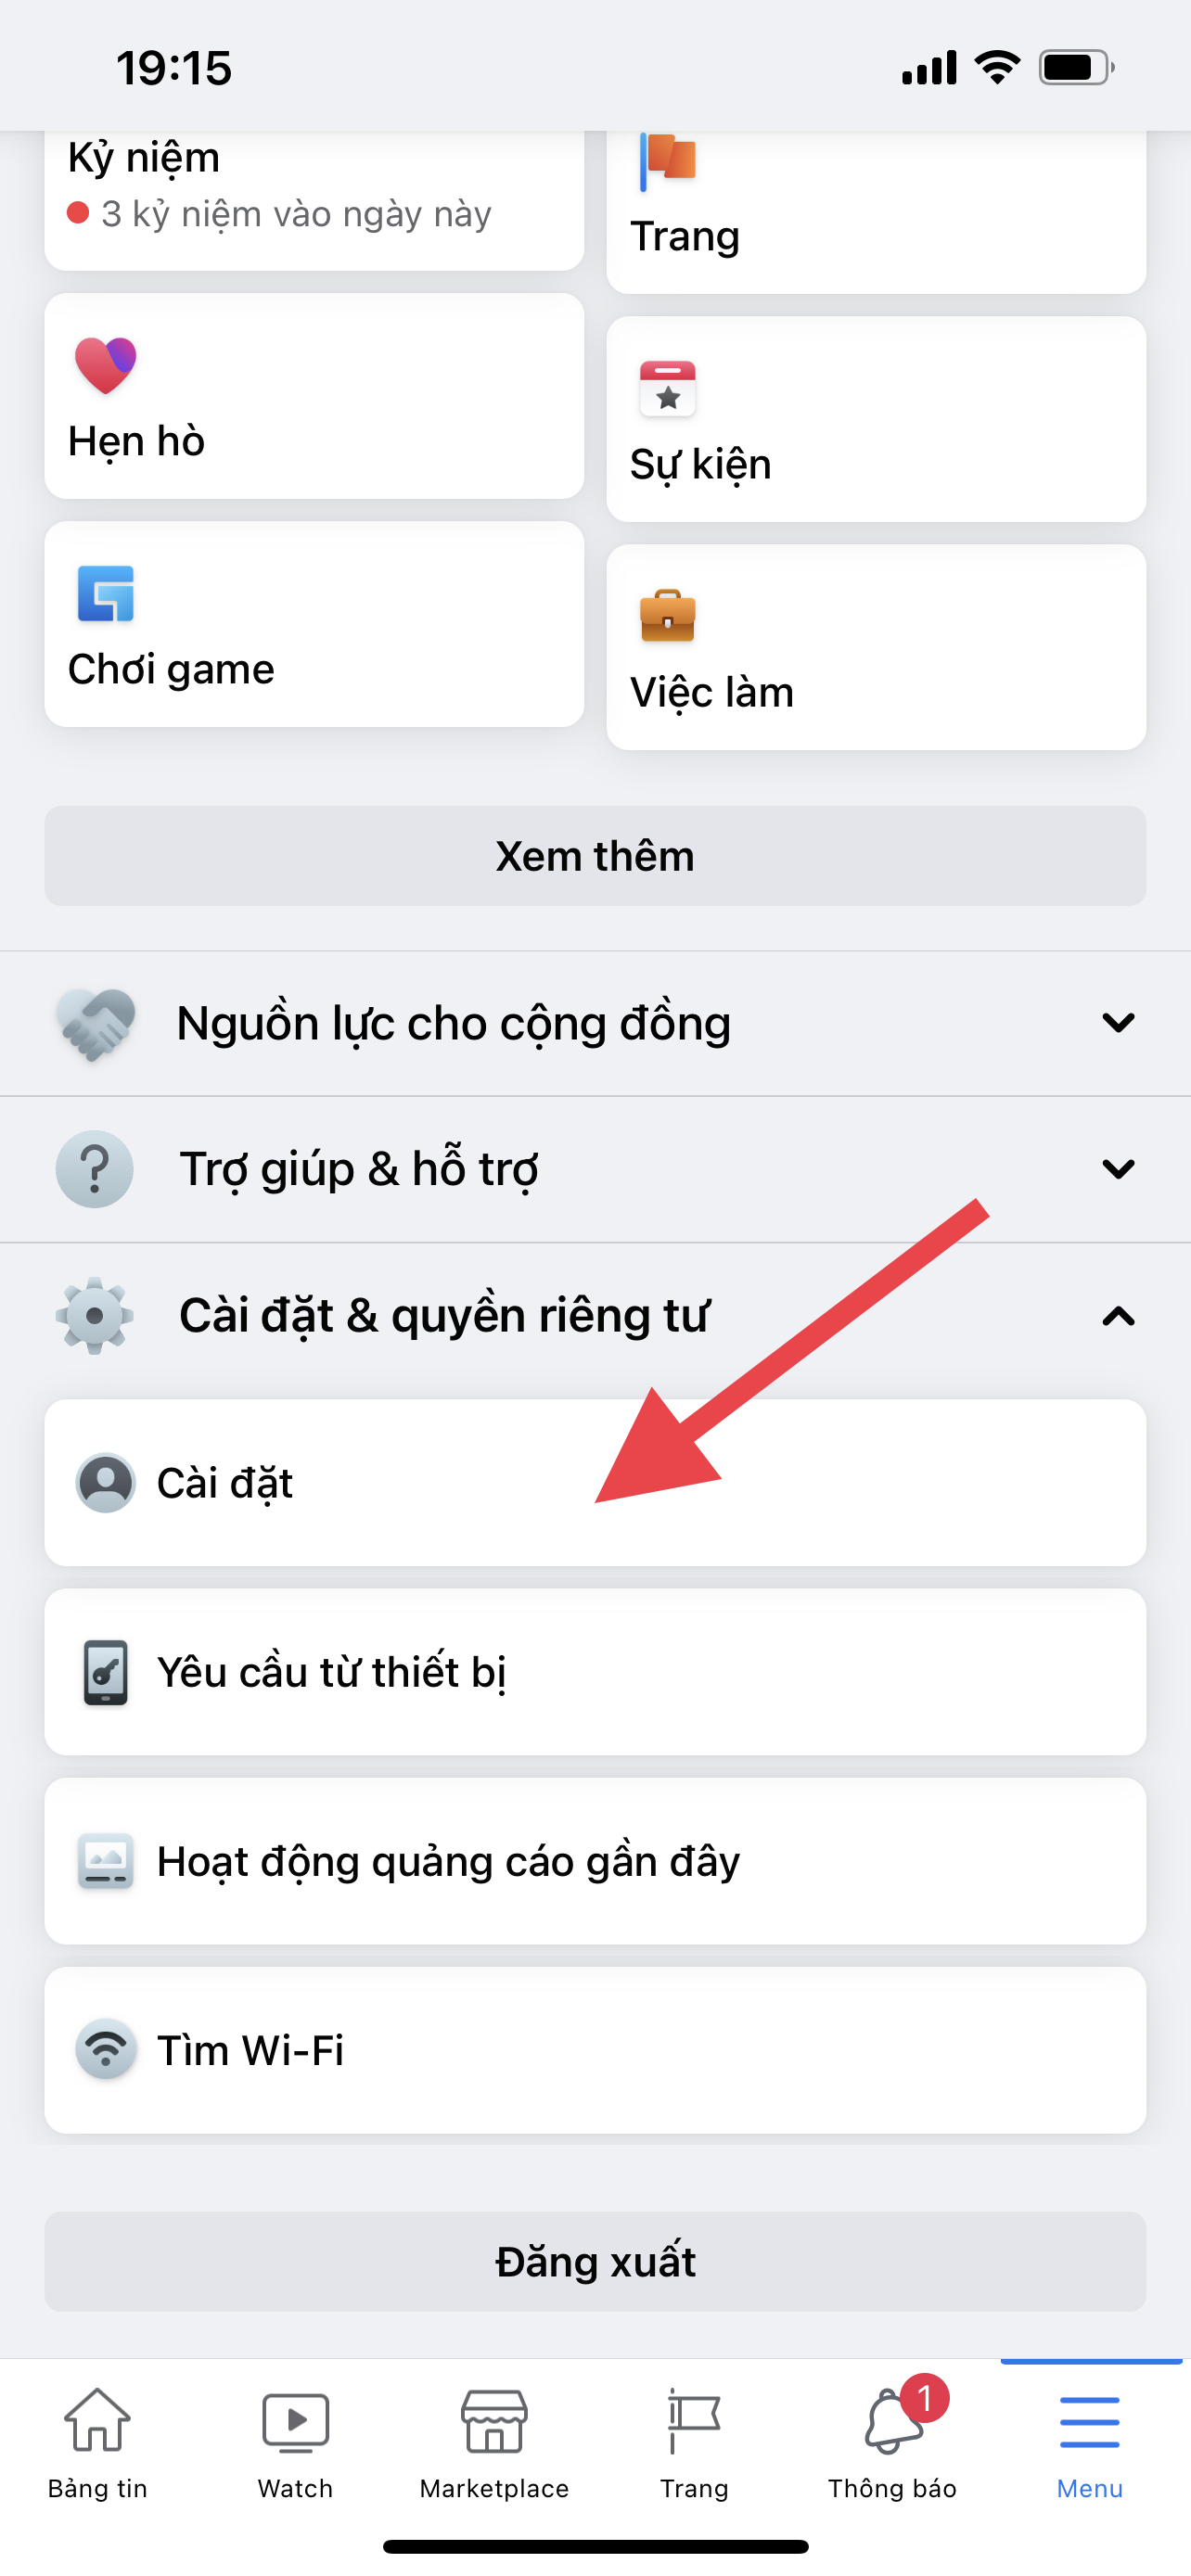 You may not know: Messenger does not have a sign out button, how to exit the account without deleting the application?  - photo 3.